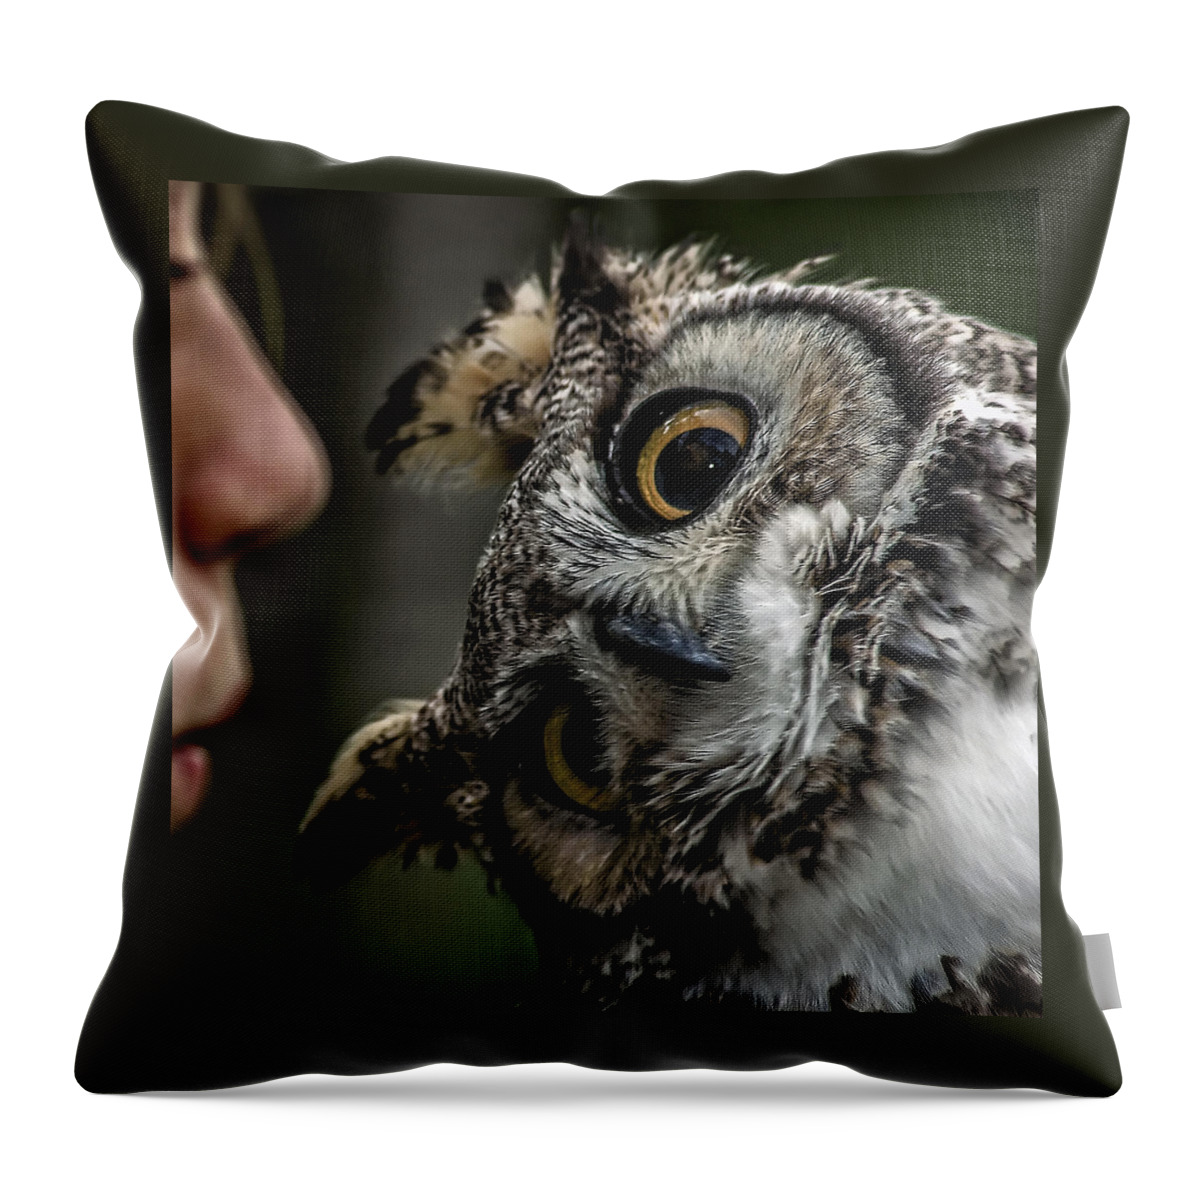 Owl Throw Pillow featuring the photograph The Owl Whisperer by Phil Cardamone